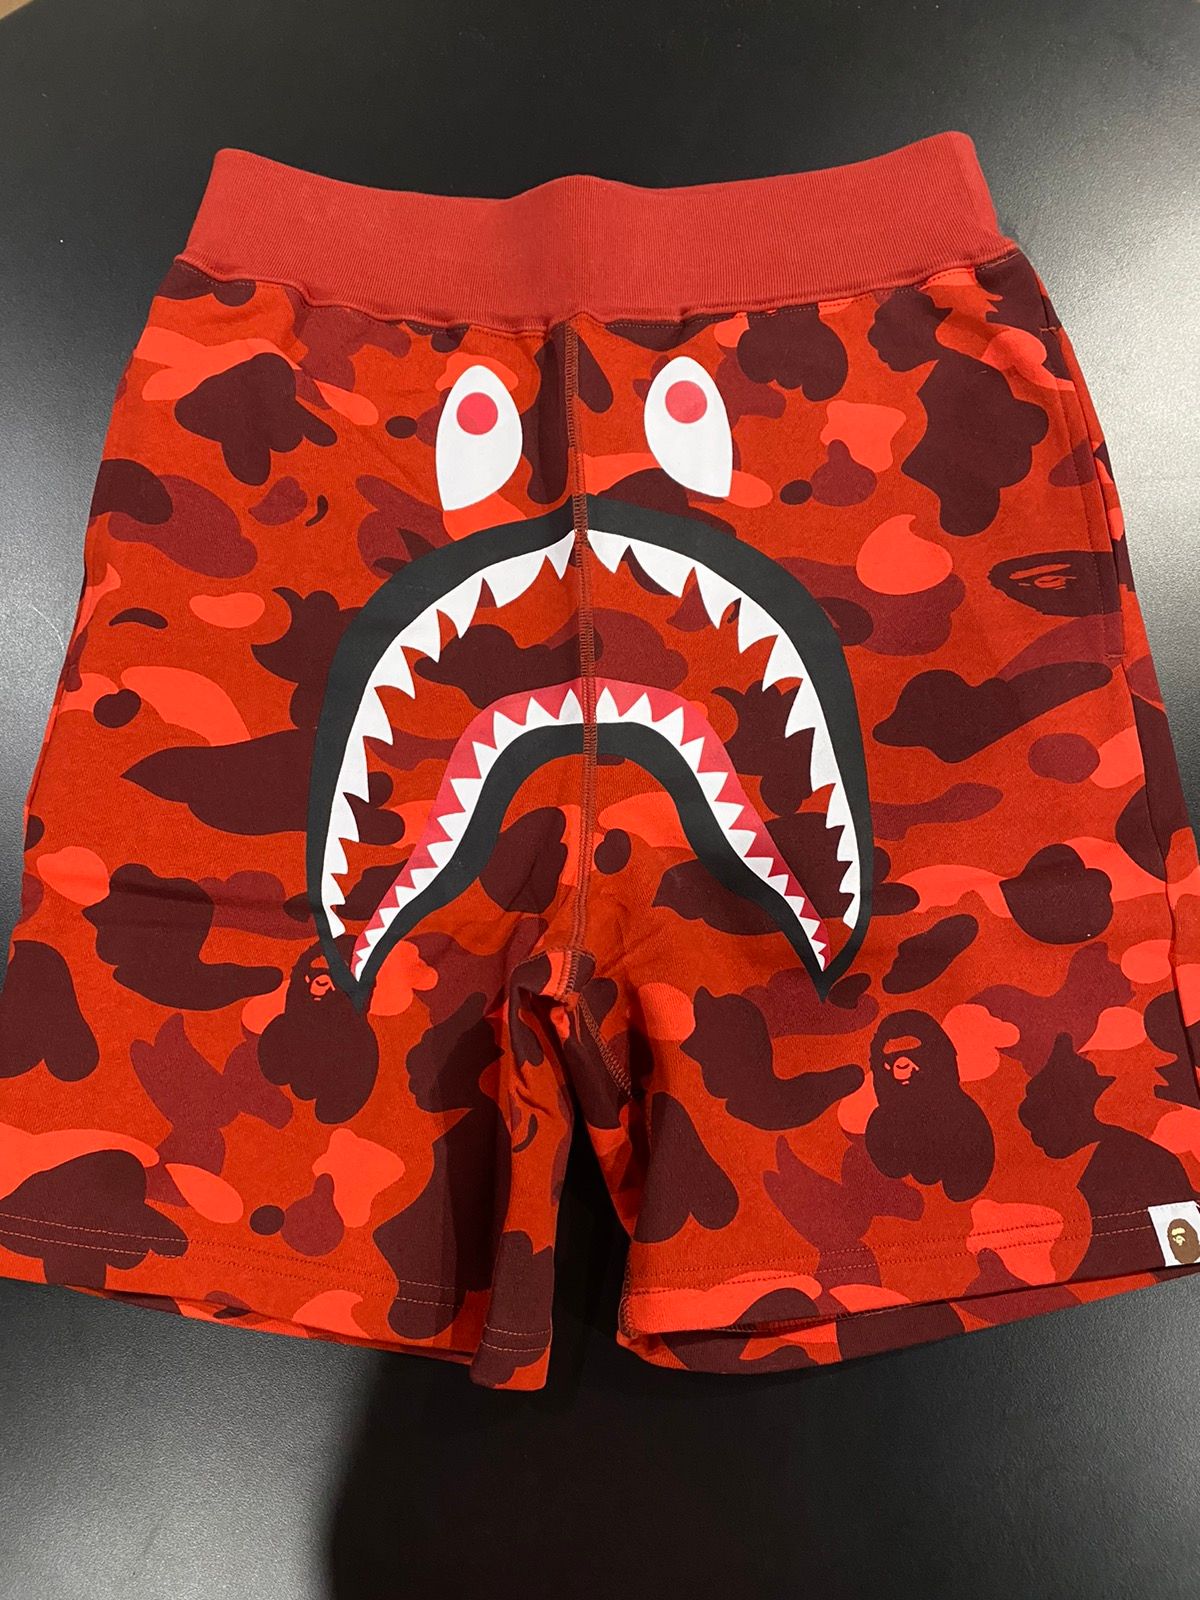 Pre-owned Bape Red Colour Camo Shark Shorts Size S